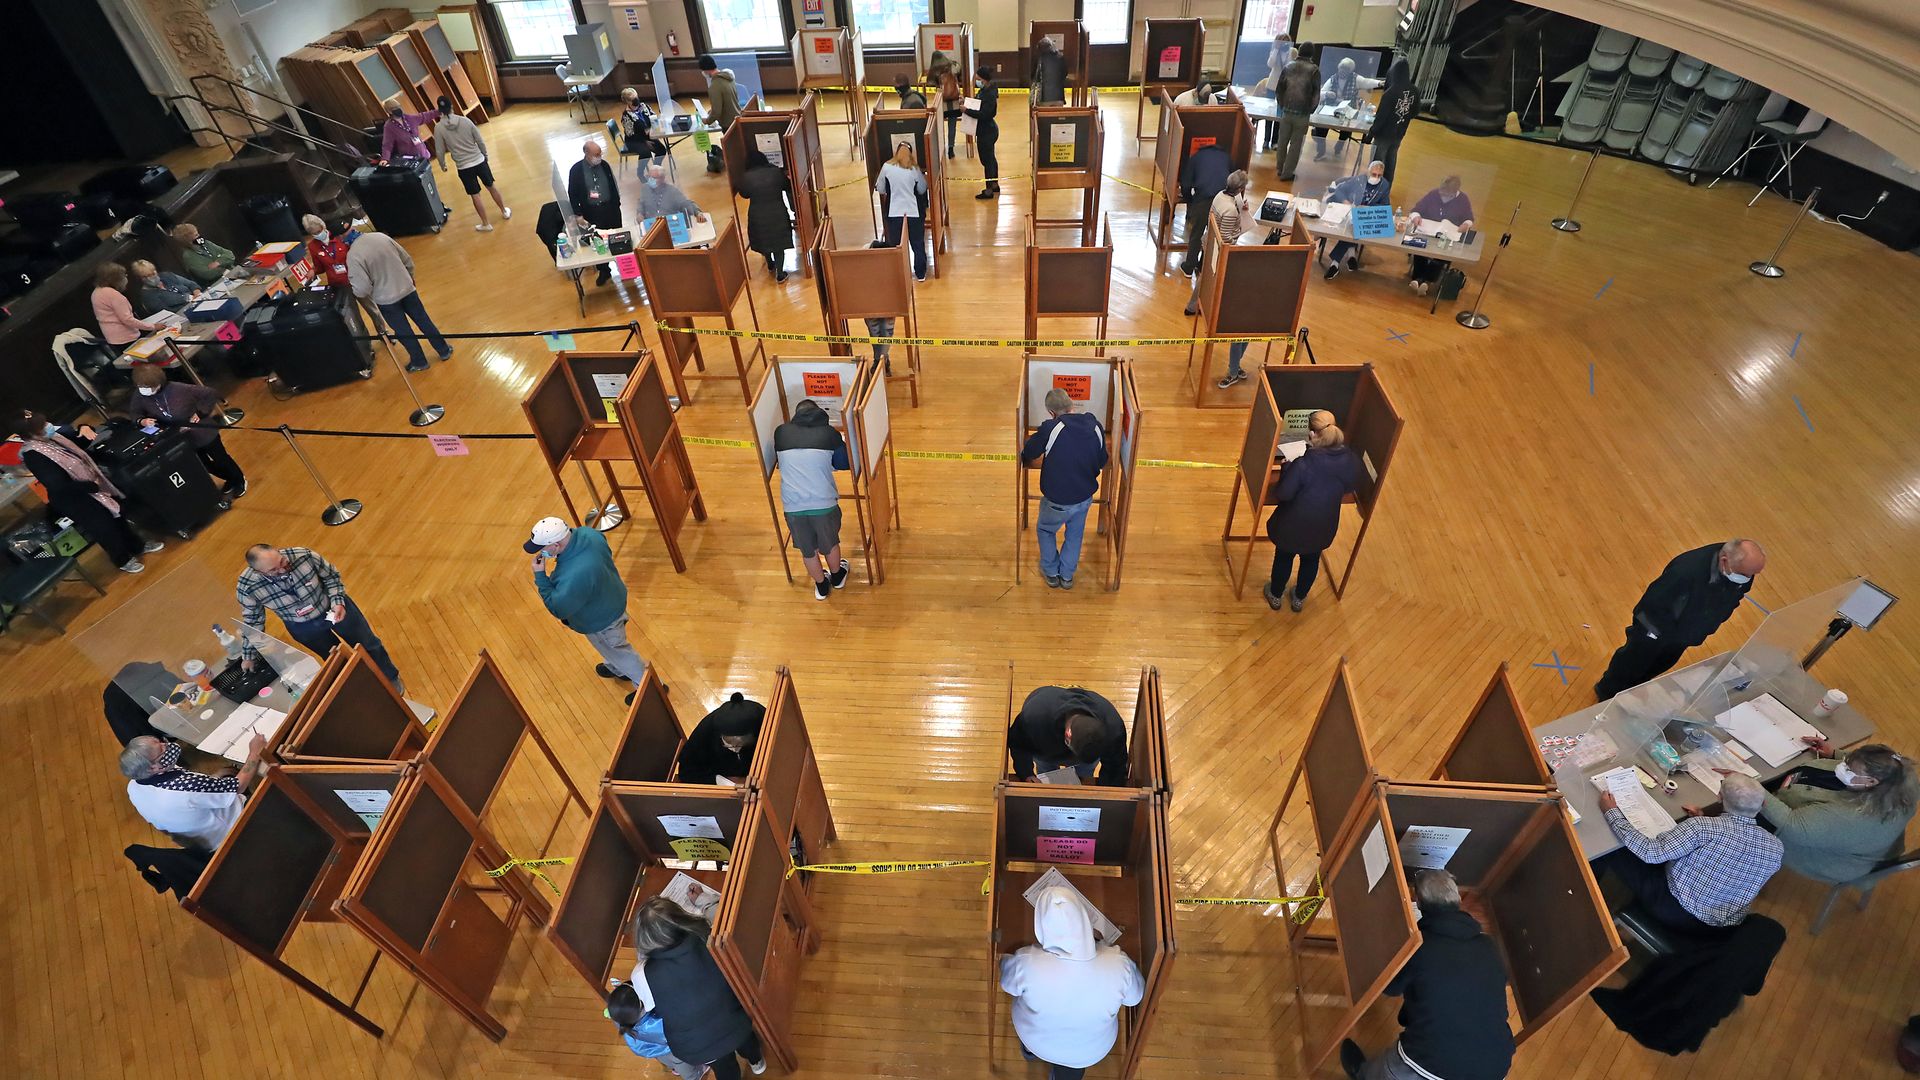 Voters practice social distancing while voting